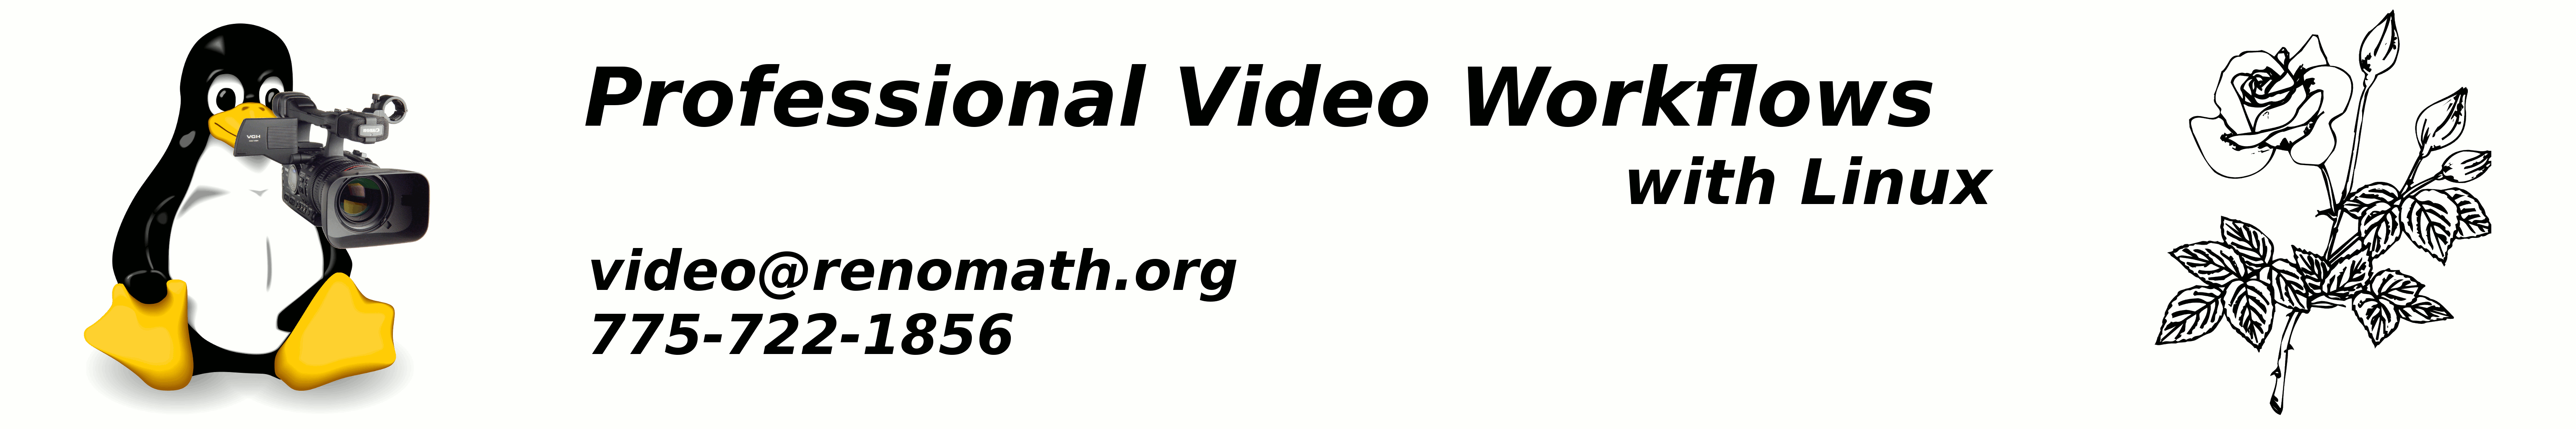 Professional Video Workflows with Linux